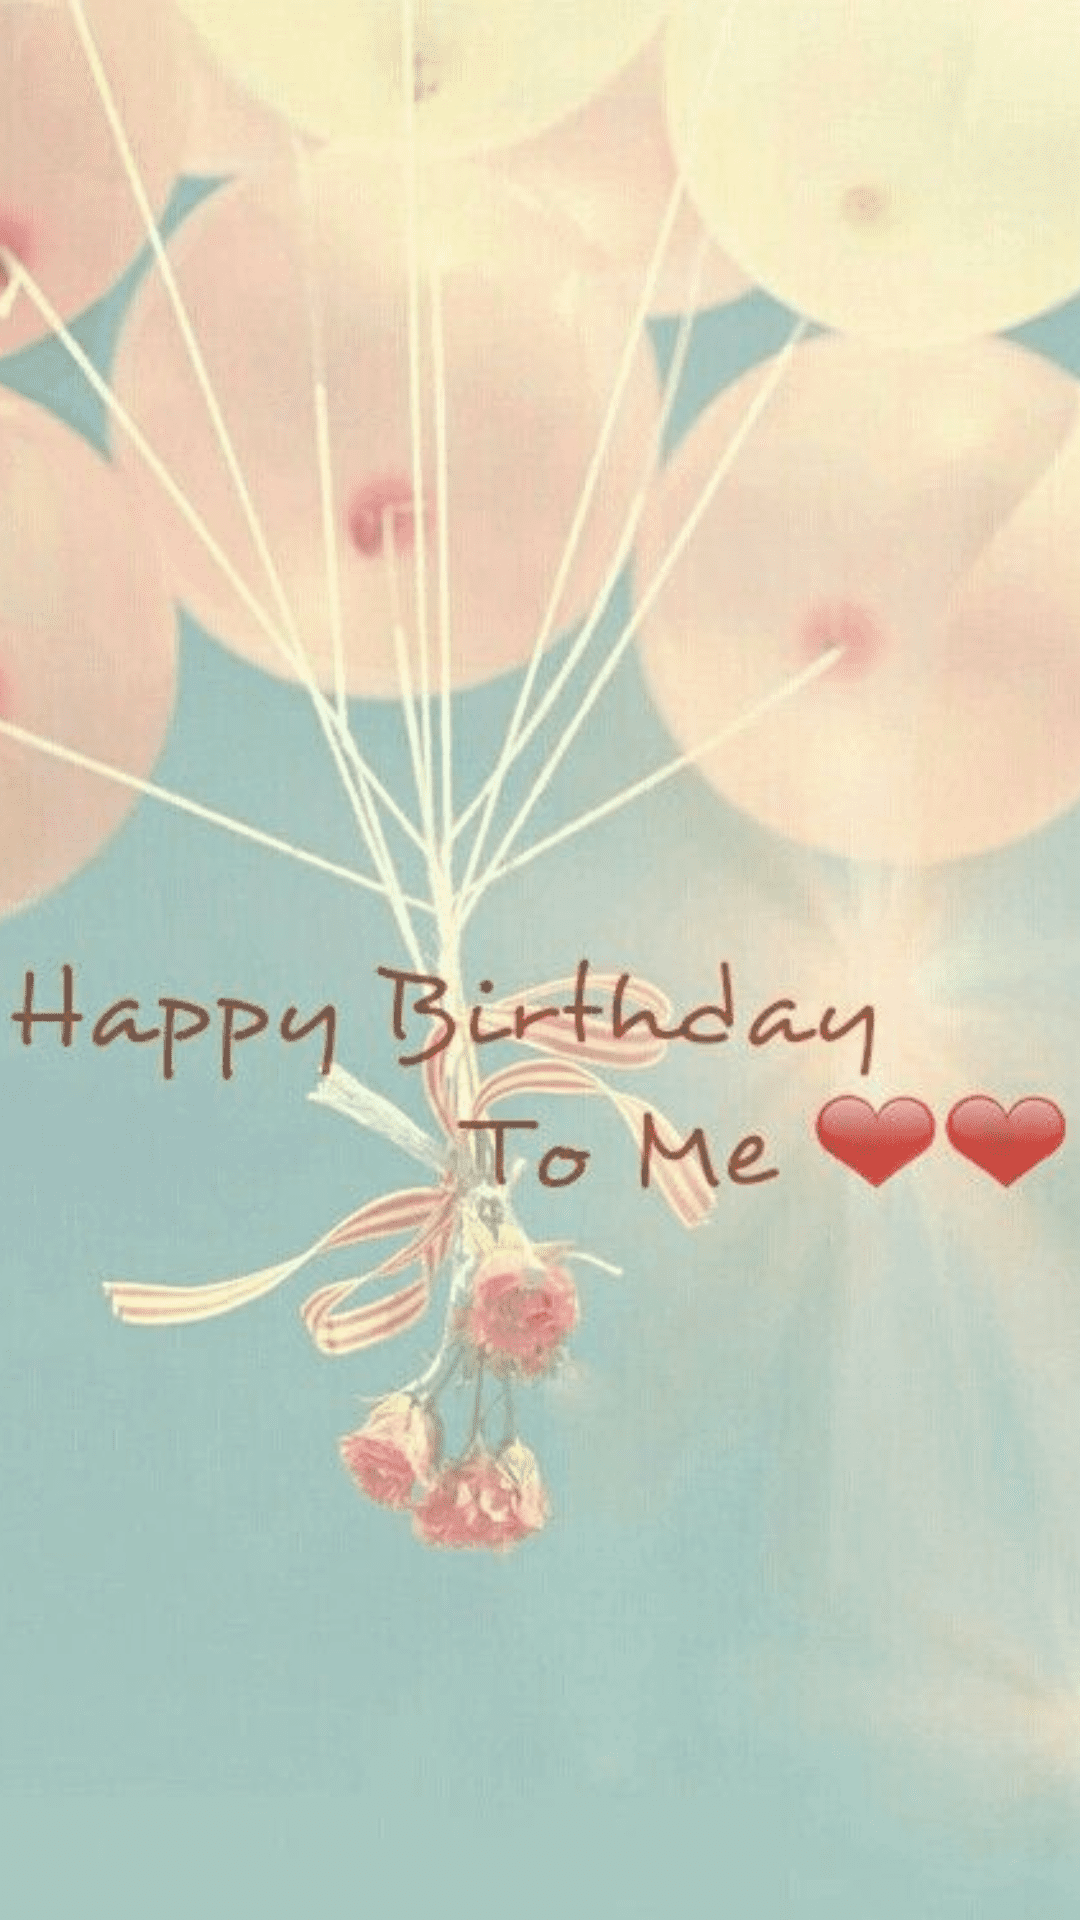 #{"id":2105,"_id":"626a8ee83e6d397ee35dea4c","name":"birthday-wishes","count":1,"data":"{\"_id\":{\"$oid\":\"626a8ee83e6d397ee35dea4c\"},\"name\":\"birthday-wishes\",\"count\":1,\"updatedAt\":{\"$date\":\"2022-04-28T12:56:08.296Z\"}}","deleted_at":null,"created_at":"2022-08-12T09:03:30.000000Z","updated_at":"2022-08-12T09:03:30.000000Z","merge_with":null,"pivot":{"taggable_id":2,"tag_id":2105,"taggable_type":"App\\Models\\Wishes"}}, #{"id":2456,"_id":null,"name":"happy-birthday-status","count":0,"data":null,"deleted_at":null,"created_at":"2023-09-01T06:38:42.000000Z","updated_at":"2023-09-01T06:38:42.000000Z","merge_with":null,"pivot":{"taggable_id":2,"tag_id":2456,"taggable_type":"App\\Models\\Wishes"}}, #{"id":2457,"_id":null,"name":"birthday-quotes-image","count":0,"data":null,"deleted_at":null,"created_at":"2023-09-01T06:38:42.000000Z","updated_at":"2023-09-01T06:38:42.000000Z","merge_with":null,"pivot":{"taggable_id":2,"tag_id":2457,"taggable_type":"App\\Models\\Wishes"}}, #{"id":2458,"_id":null,"name":"birthday-cake","count":0,"data":null,"deleted_at":null,"created_at":"2023-09-01T07:26:45.000000Z","updated_at":"2023-09-01T07:26:45.000000Z","merge_with":null,"pivot":{"taggable_id":2,"tag_id":2458,"taggable_type":"App\\Models\\Wishes"}}, #{"id":602,"_id":"61f3f785e0f744570541c47d","name":"happy-birthday-photos","count":16,"data":"{\"_id\":{\"$oid\":\"61f3f785e0f744570541c47d\"},\"id\":\"1076\",\"name\":\"happy-birthday-photos\",\"created_at\":\"2021-10-18-11:37:53\",\"updated_at\":\"2021-10-18-11:37:53\",\"updatedAt\":{\"$date\":\"2022-01-28T14:33:44.942Z\"},\"count\":16}","deleted_at":null,"created_at":"2021-10-18T11:37:53.000000Z","updated_at":"2021-10-18T11:37:53.000000Z","merge_with":null,"pivot":{"taggable_id":2,"tag_id":602,"taggable_type":"App\\Models\\Wishes"}}, #{"id":600,"_id":"61f3f785e0f744570541c47b","name":"happy-birthday-pictures","count":16,"data":"{\"_id\":{\"$oid\":\"61f3f785e0f744570541c47b\"},\"id\":\"1074\",\"name\":\"happy-birthday-pictures\",\"created_at\":\"2021-10-18-11:37:53\",\"updated_at\":\"2021-10-18-11:37:53\",\"updatedAt\":{\"$date\":\"2022-01-28T14:33:44.942Z\"},\"count\":16}","deleted_at":null,"created_at":"2021-10-18T11:37:53.000000Z","updated_at":"2021-10-18T11:37:53.000000Z","merge_with":null,"pivot":{"taggable_id":2,"tag_id":600,"taggable_type":"App\\Models\\Wishes"}}